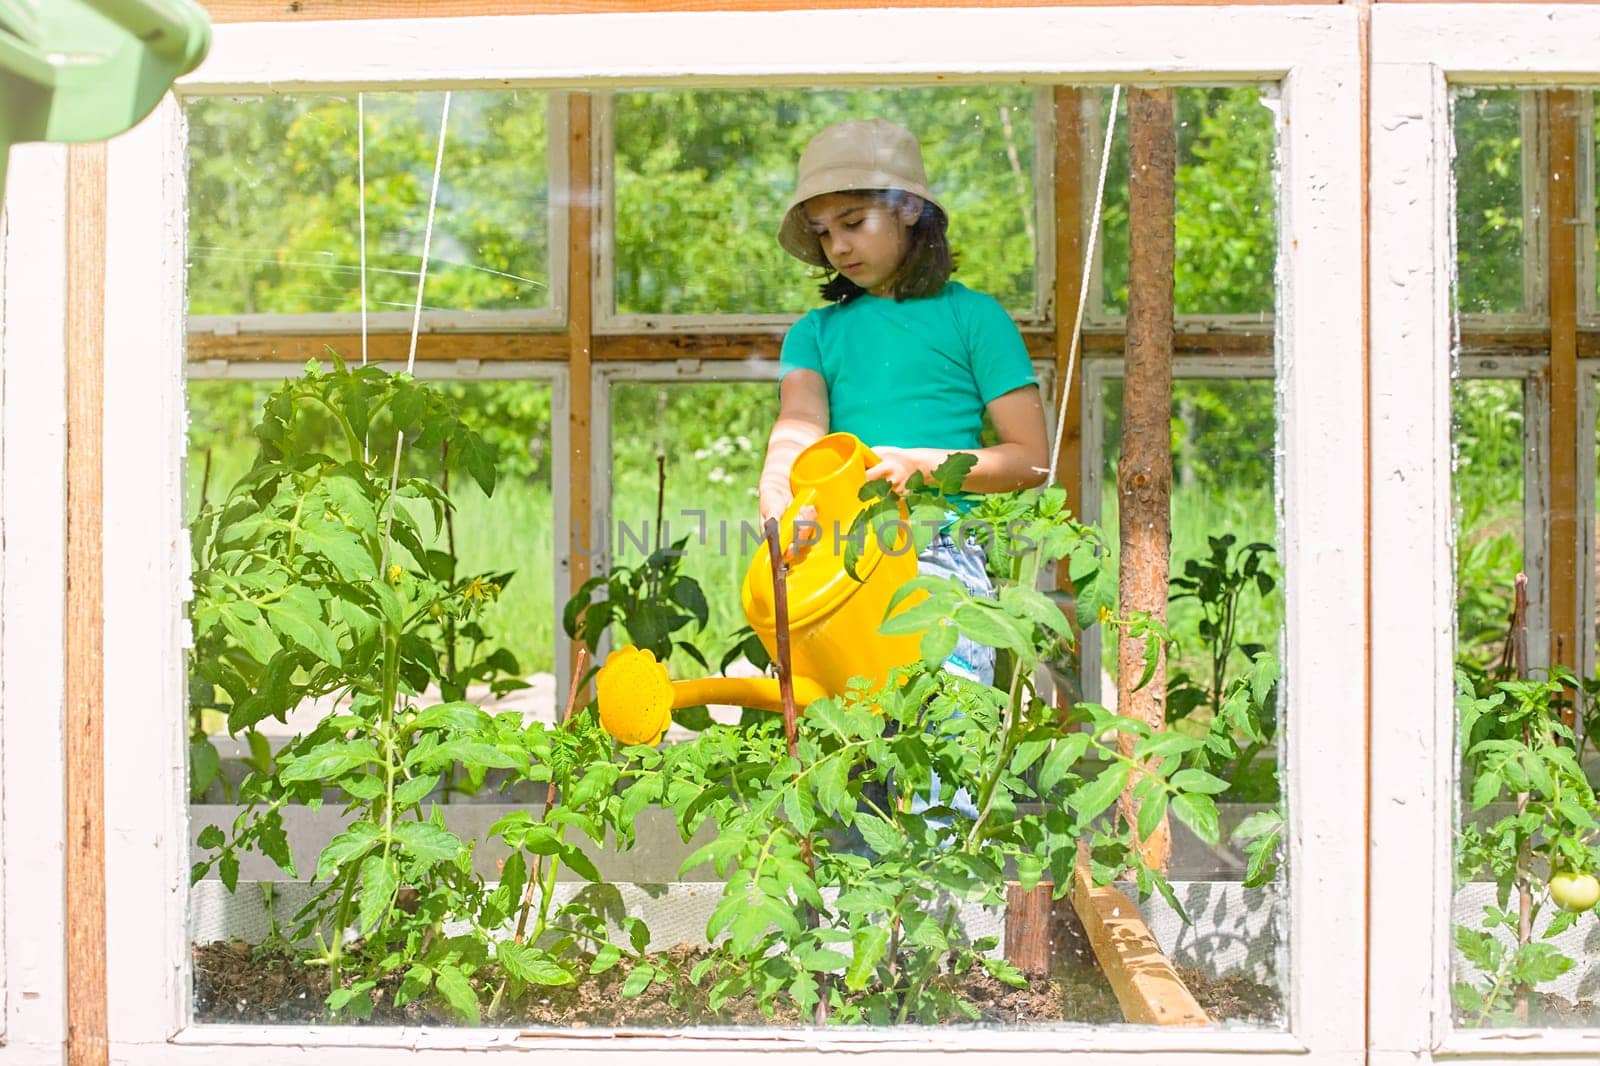 A little girl waters tomato bushes in a vegetable greenhouse by Zakharova